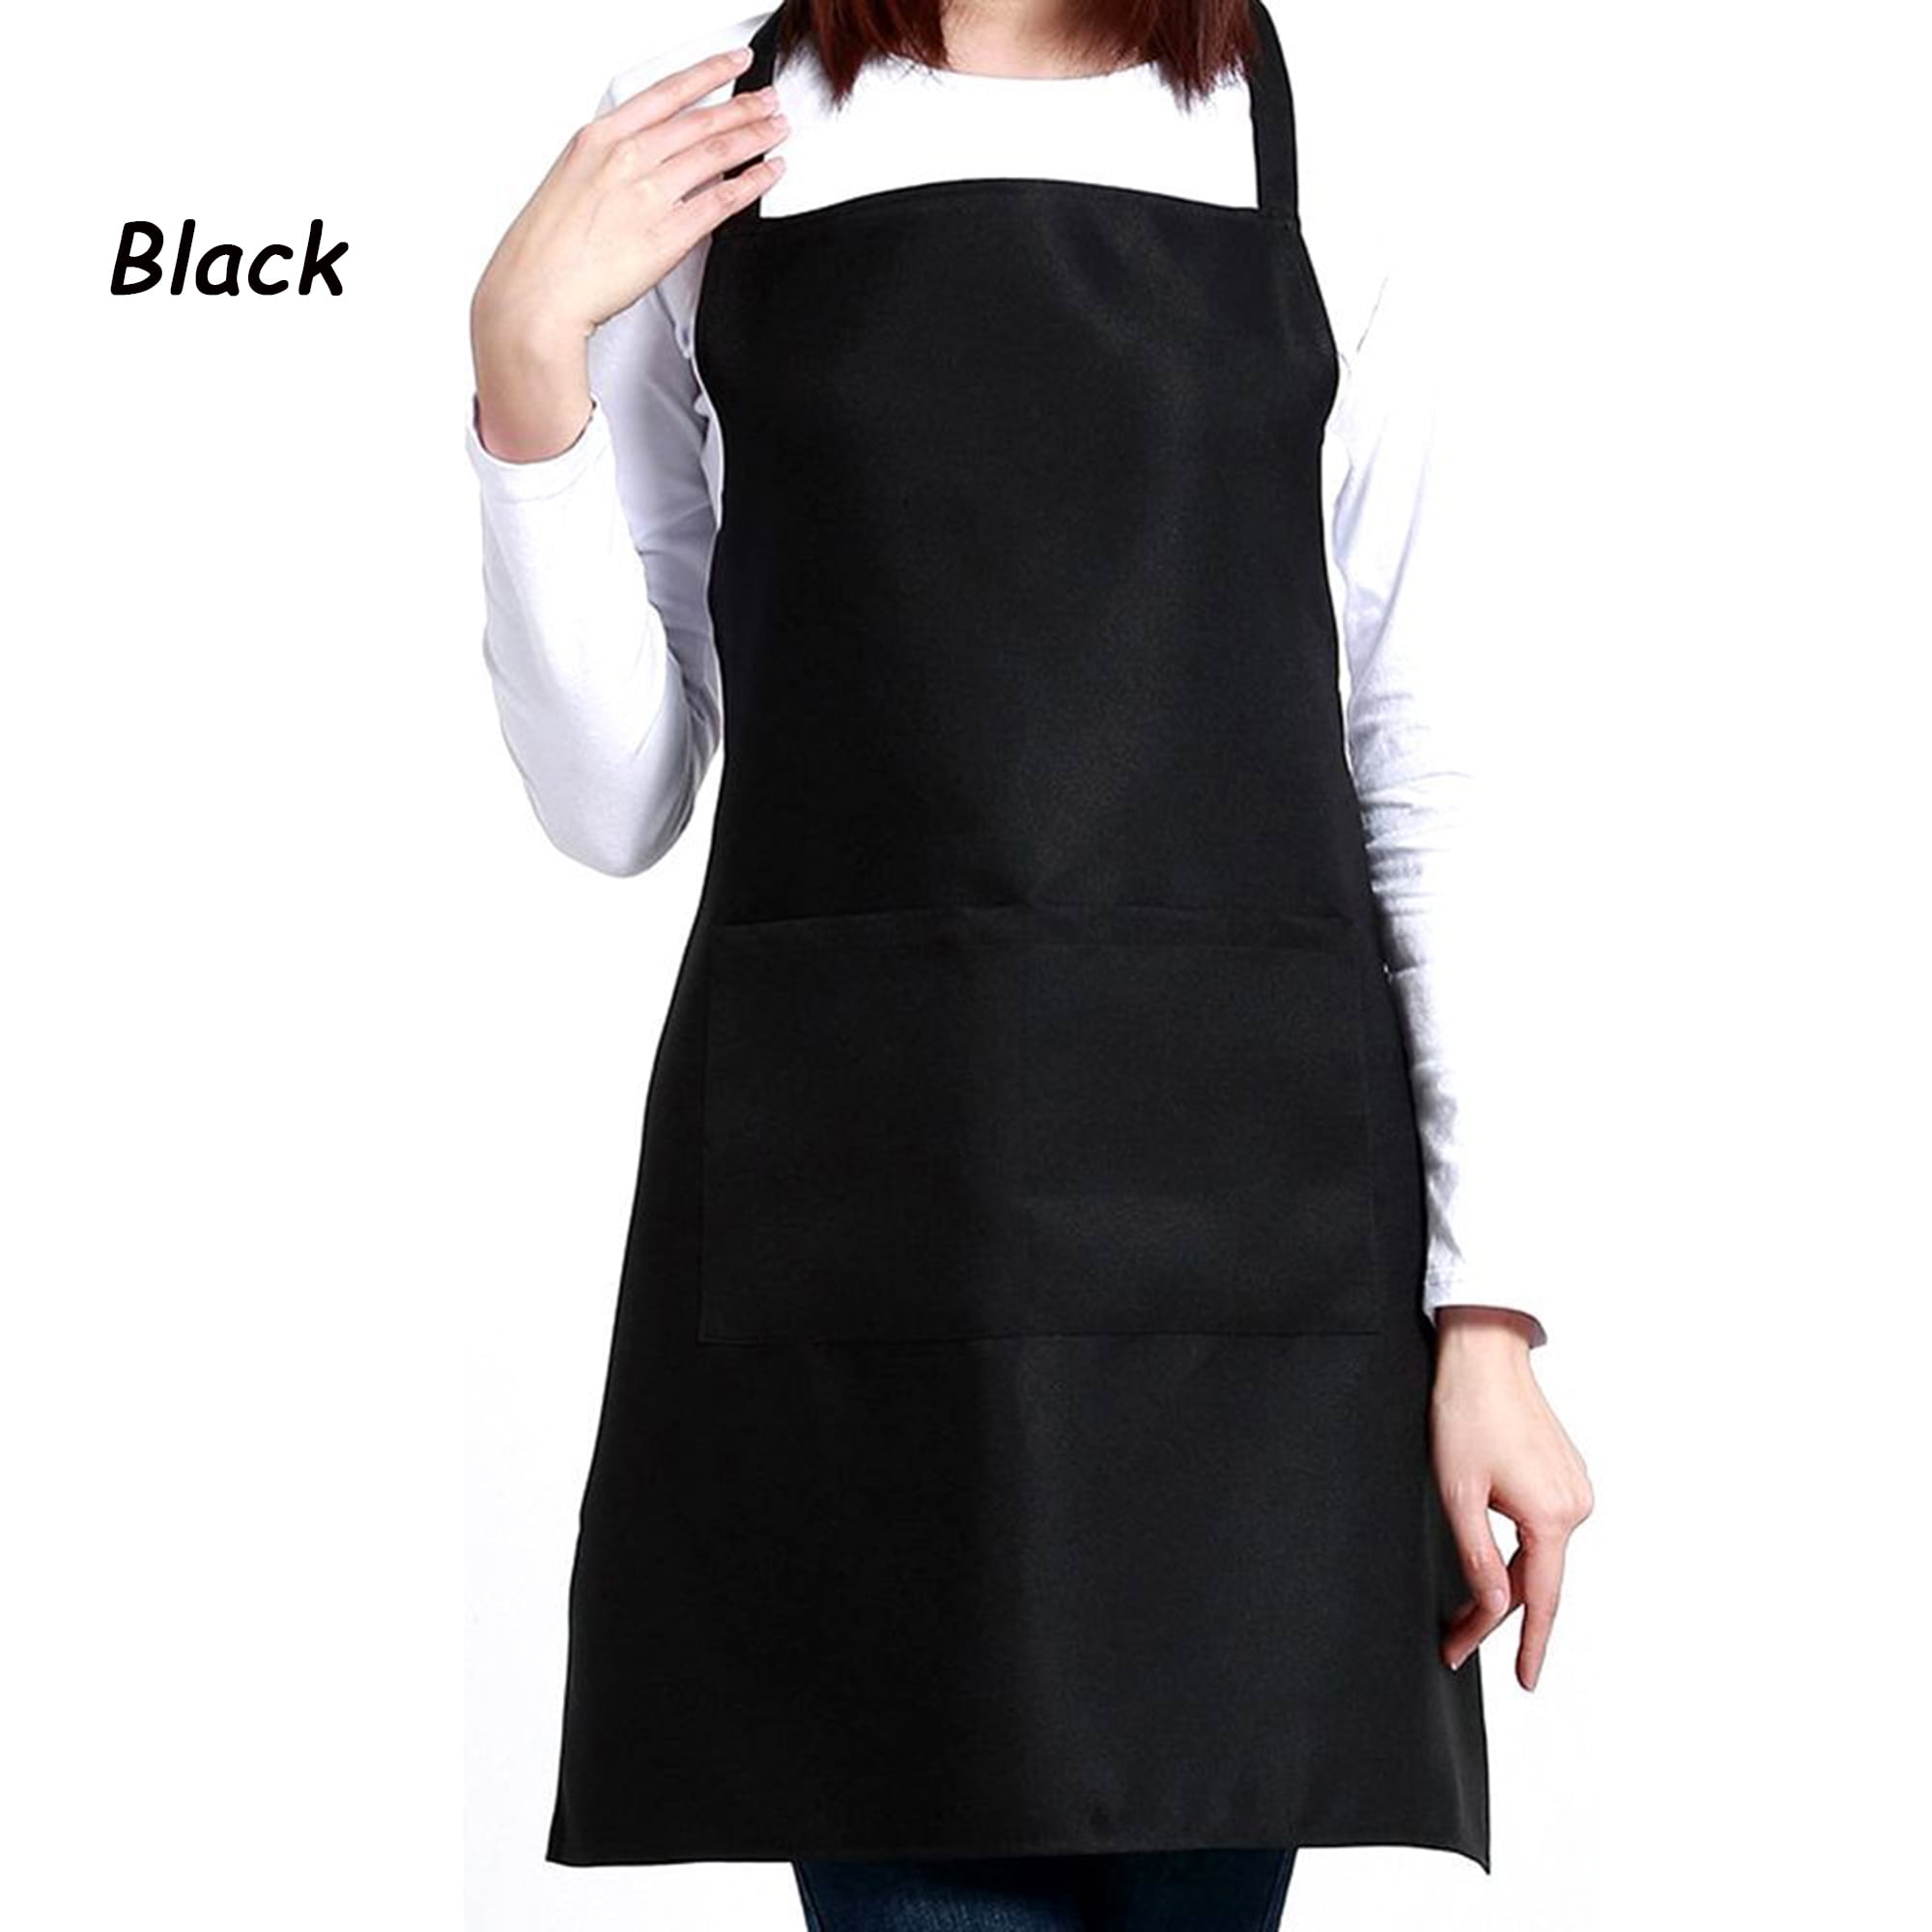 Nk Home Apron Waterdrop Cooking Bib Baking Apron 2 Pockets For Women And Men Chef 